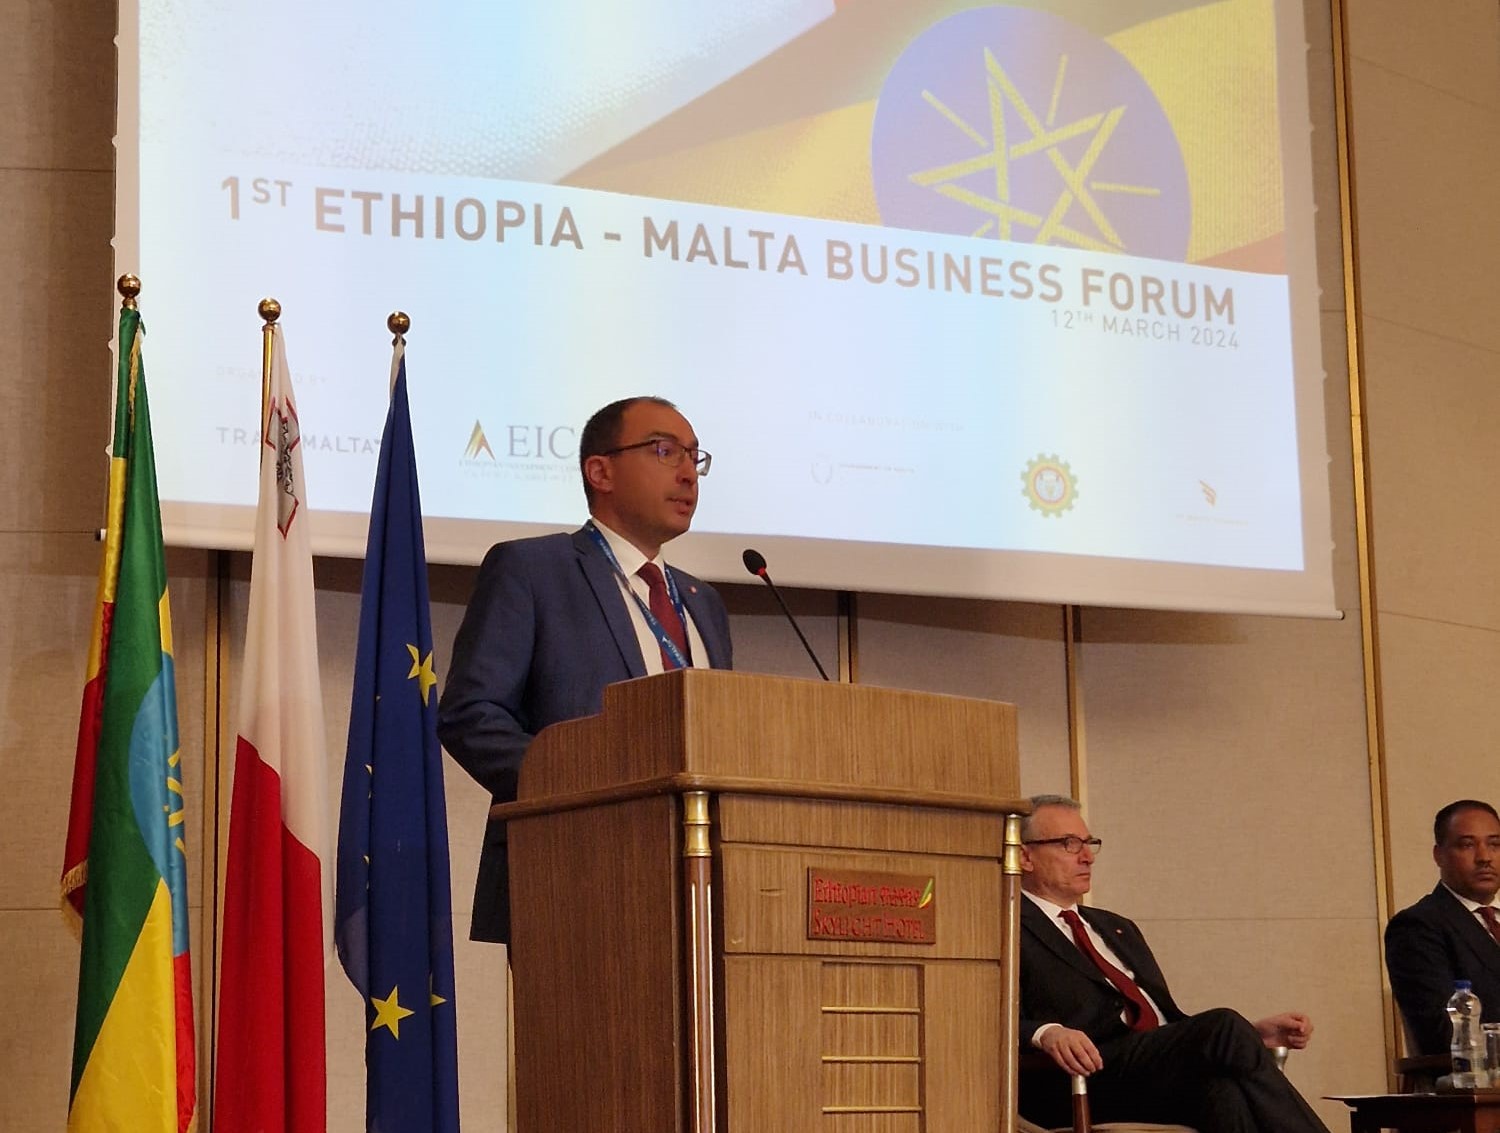 TradeMalta organises its first Trade Mission to Ethiopia